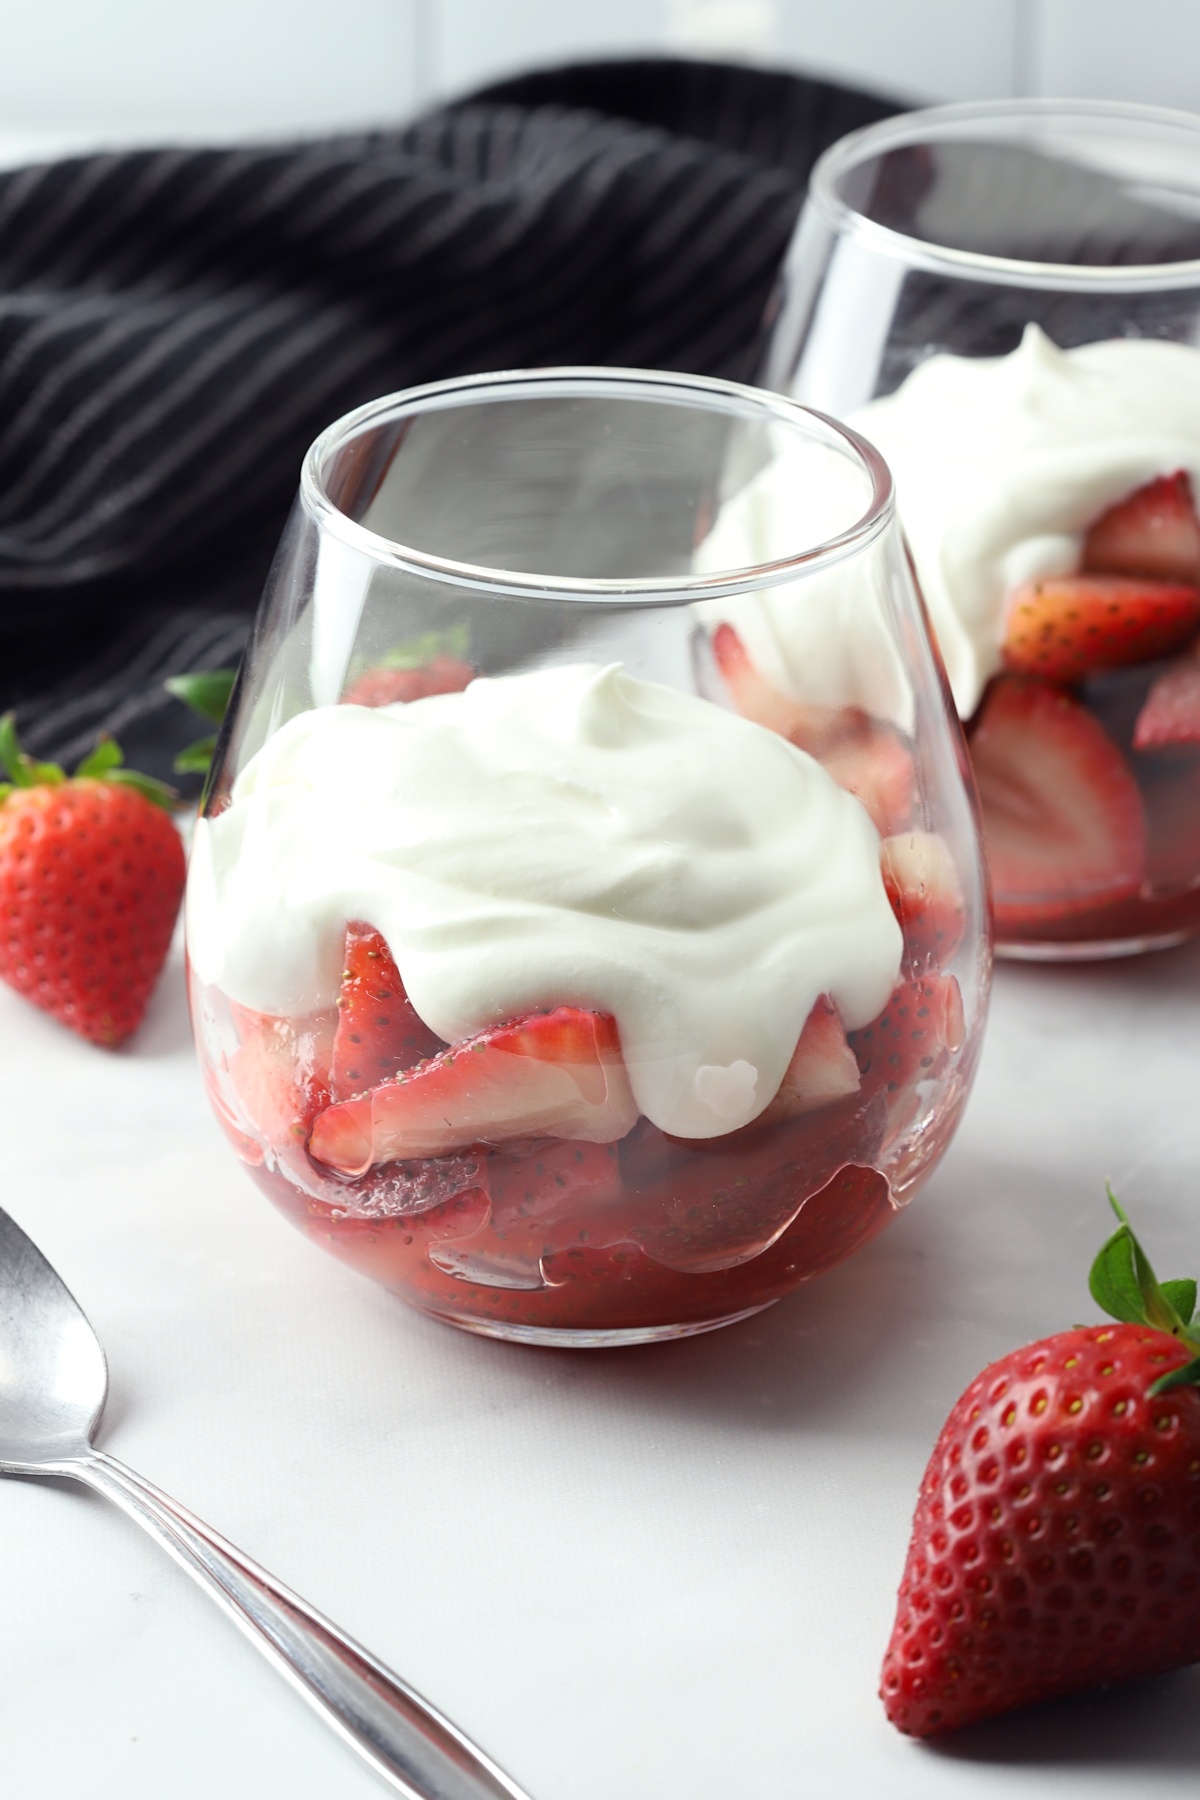 A stemless wine glass with strawberries and cream, with a metal spoon.